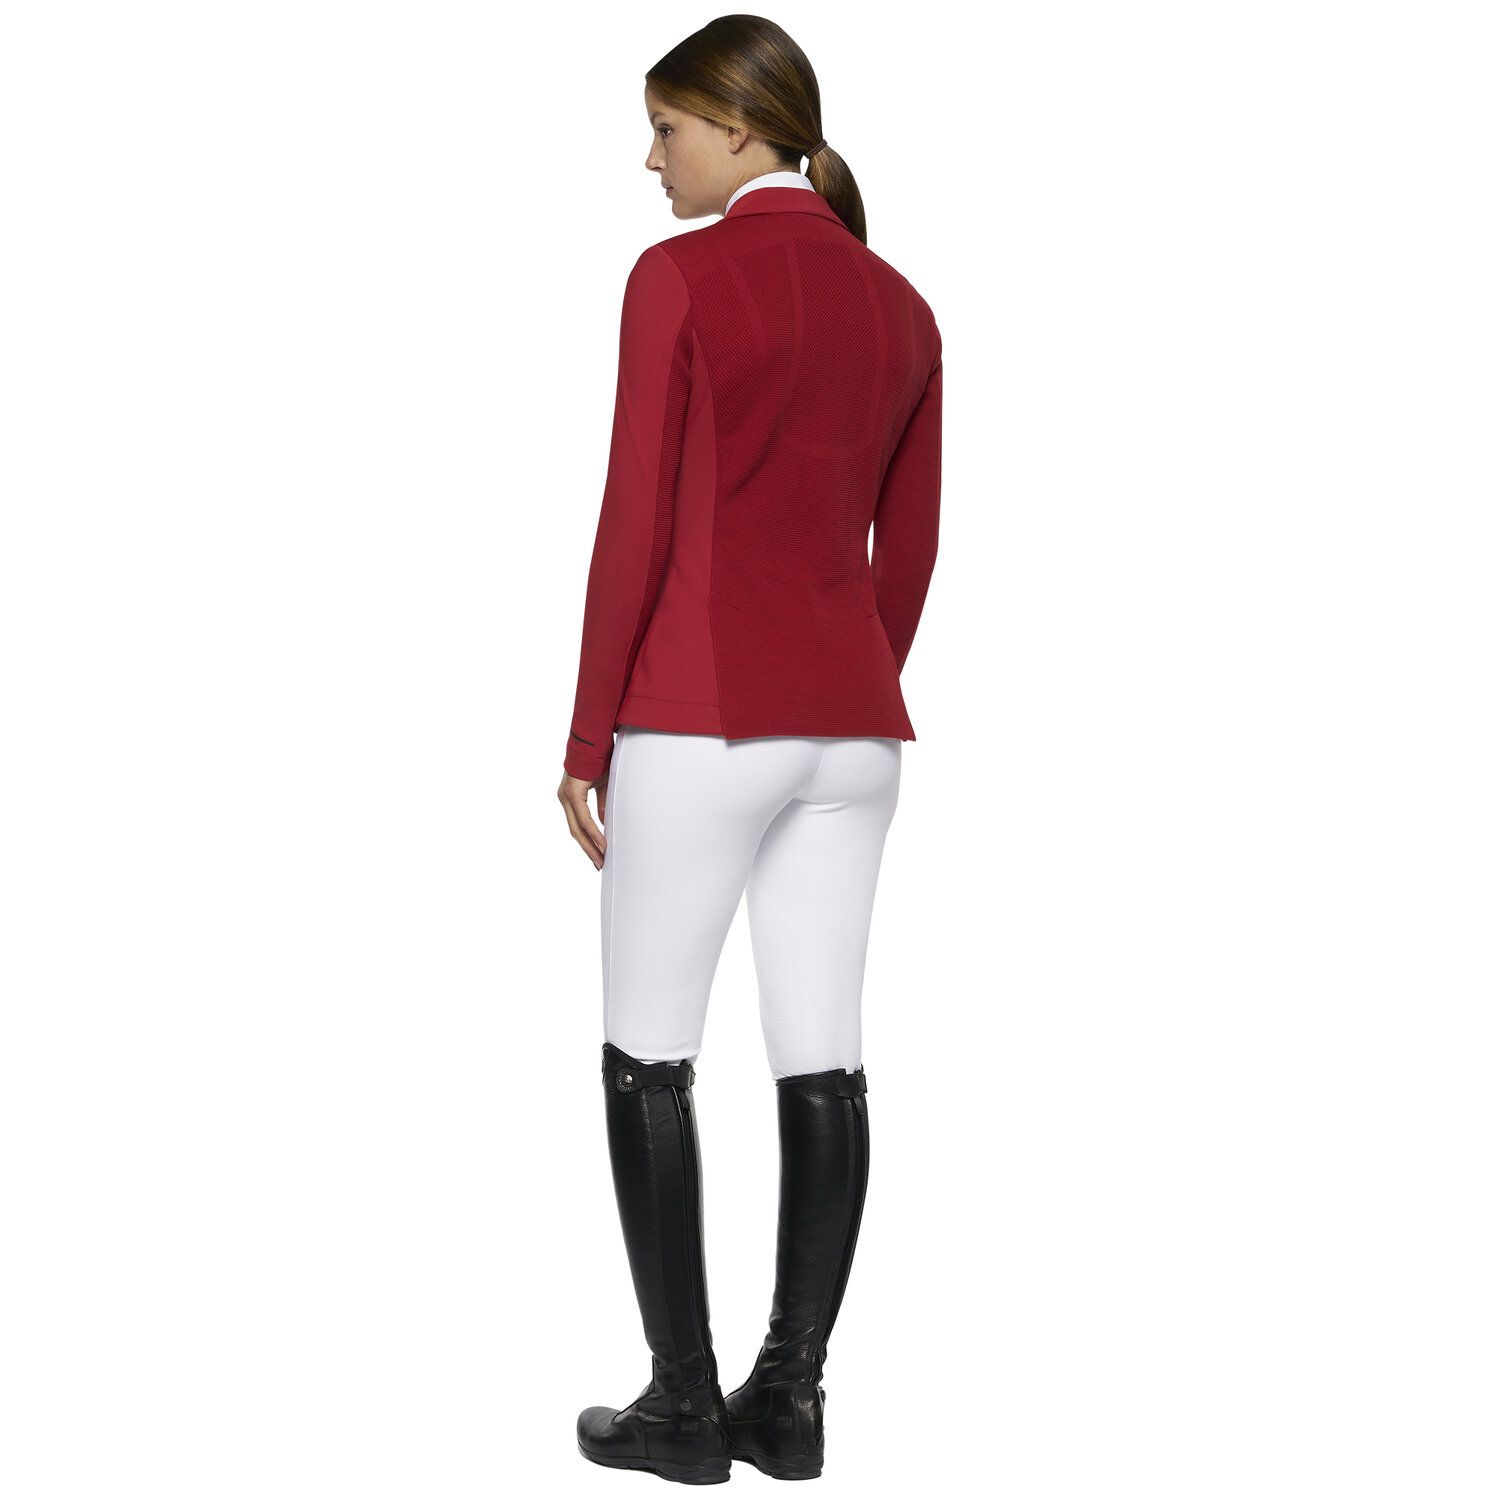 Cavalleria Toscana Women's REVO zip riding jacket with technical knit inserts RED-2